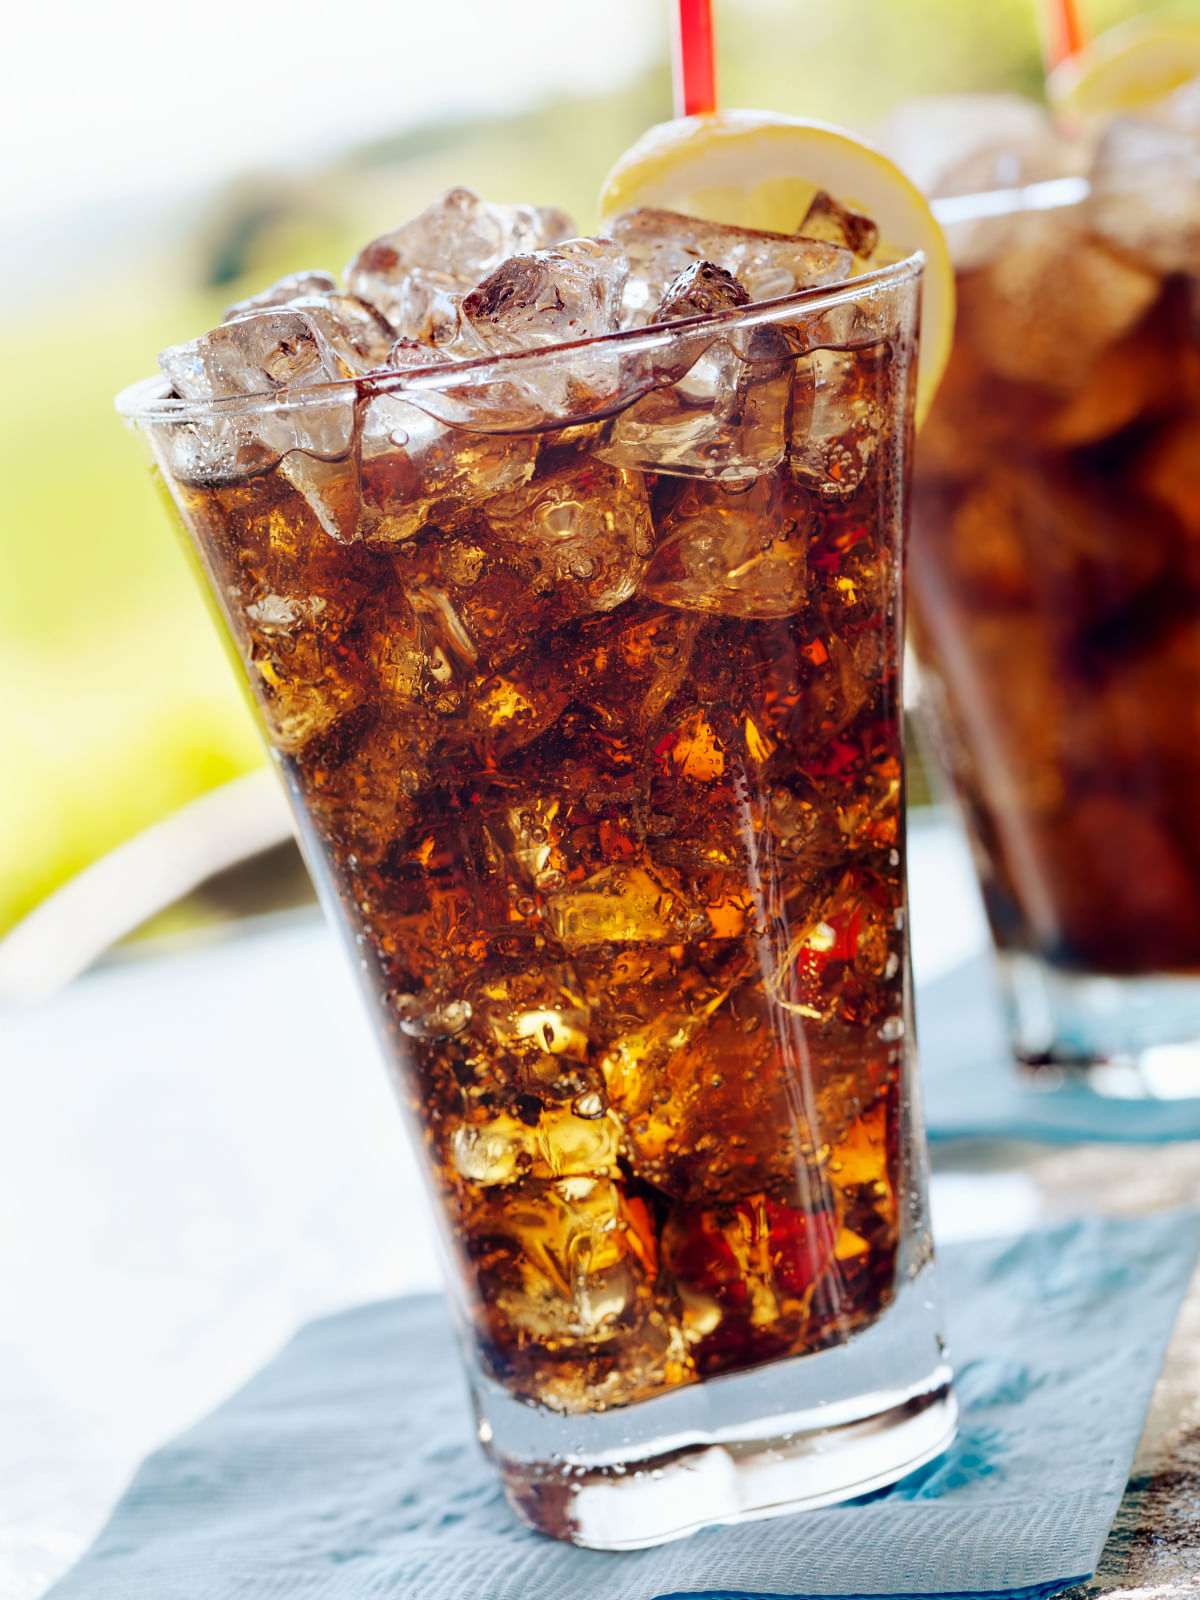 As if you needed another reason to kick this bad habit, drinking soda can harm your ticker